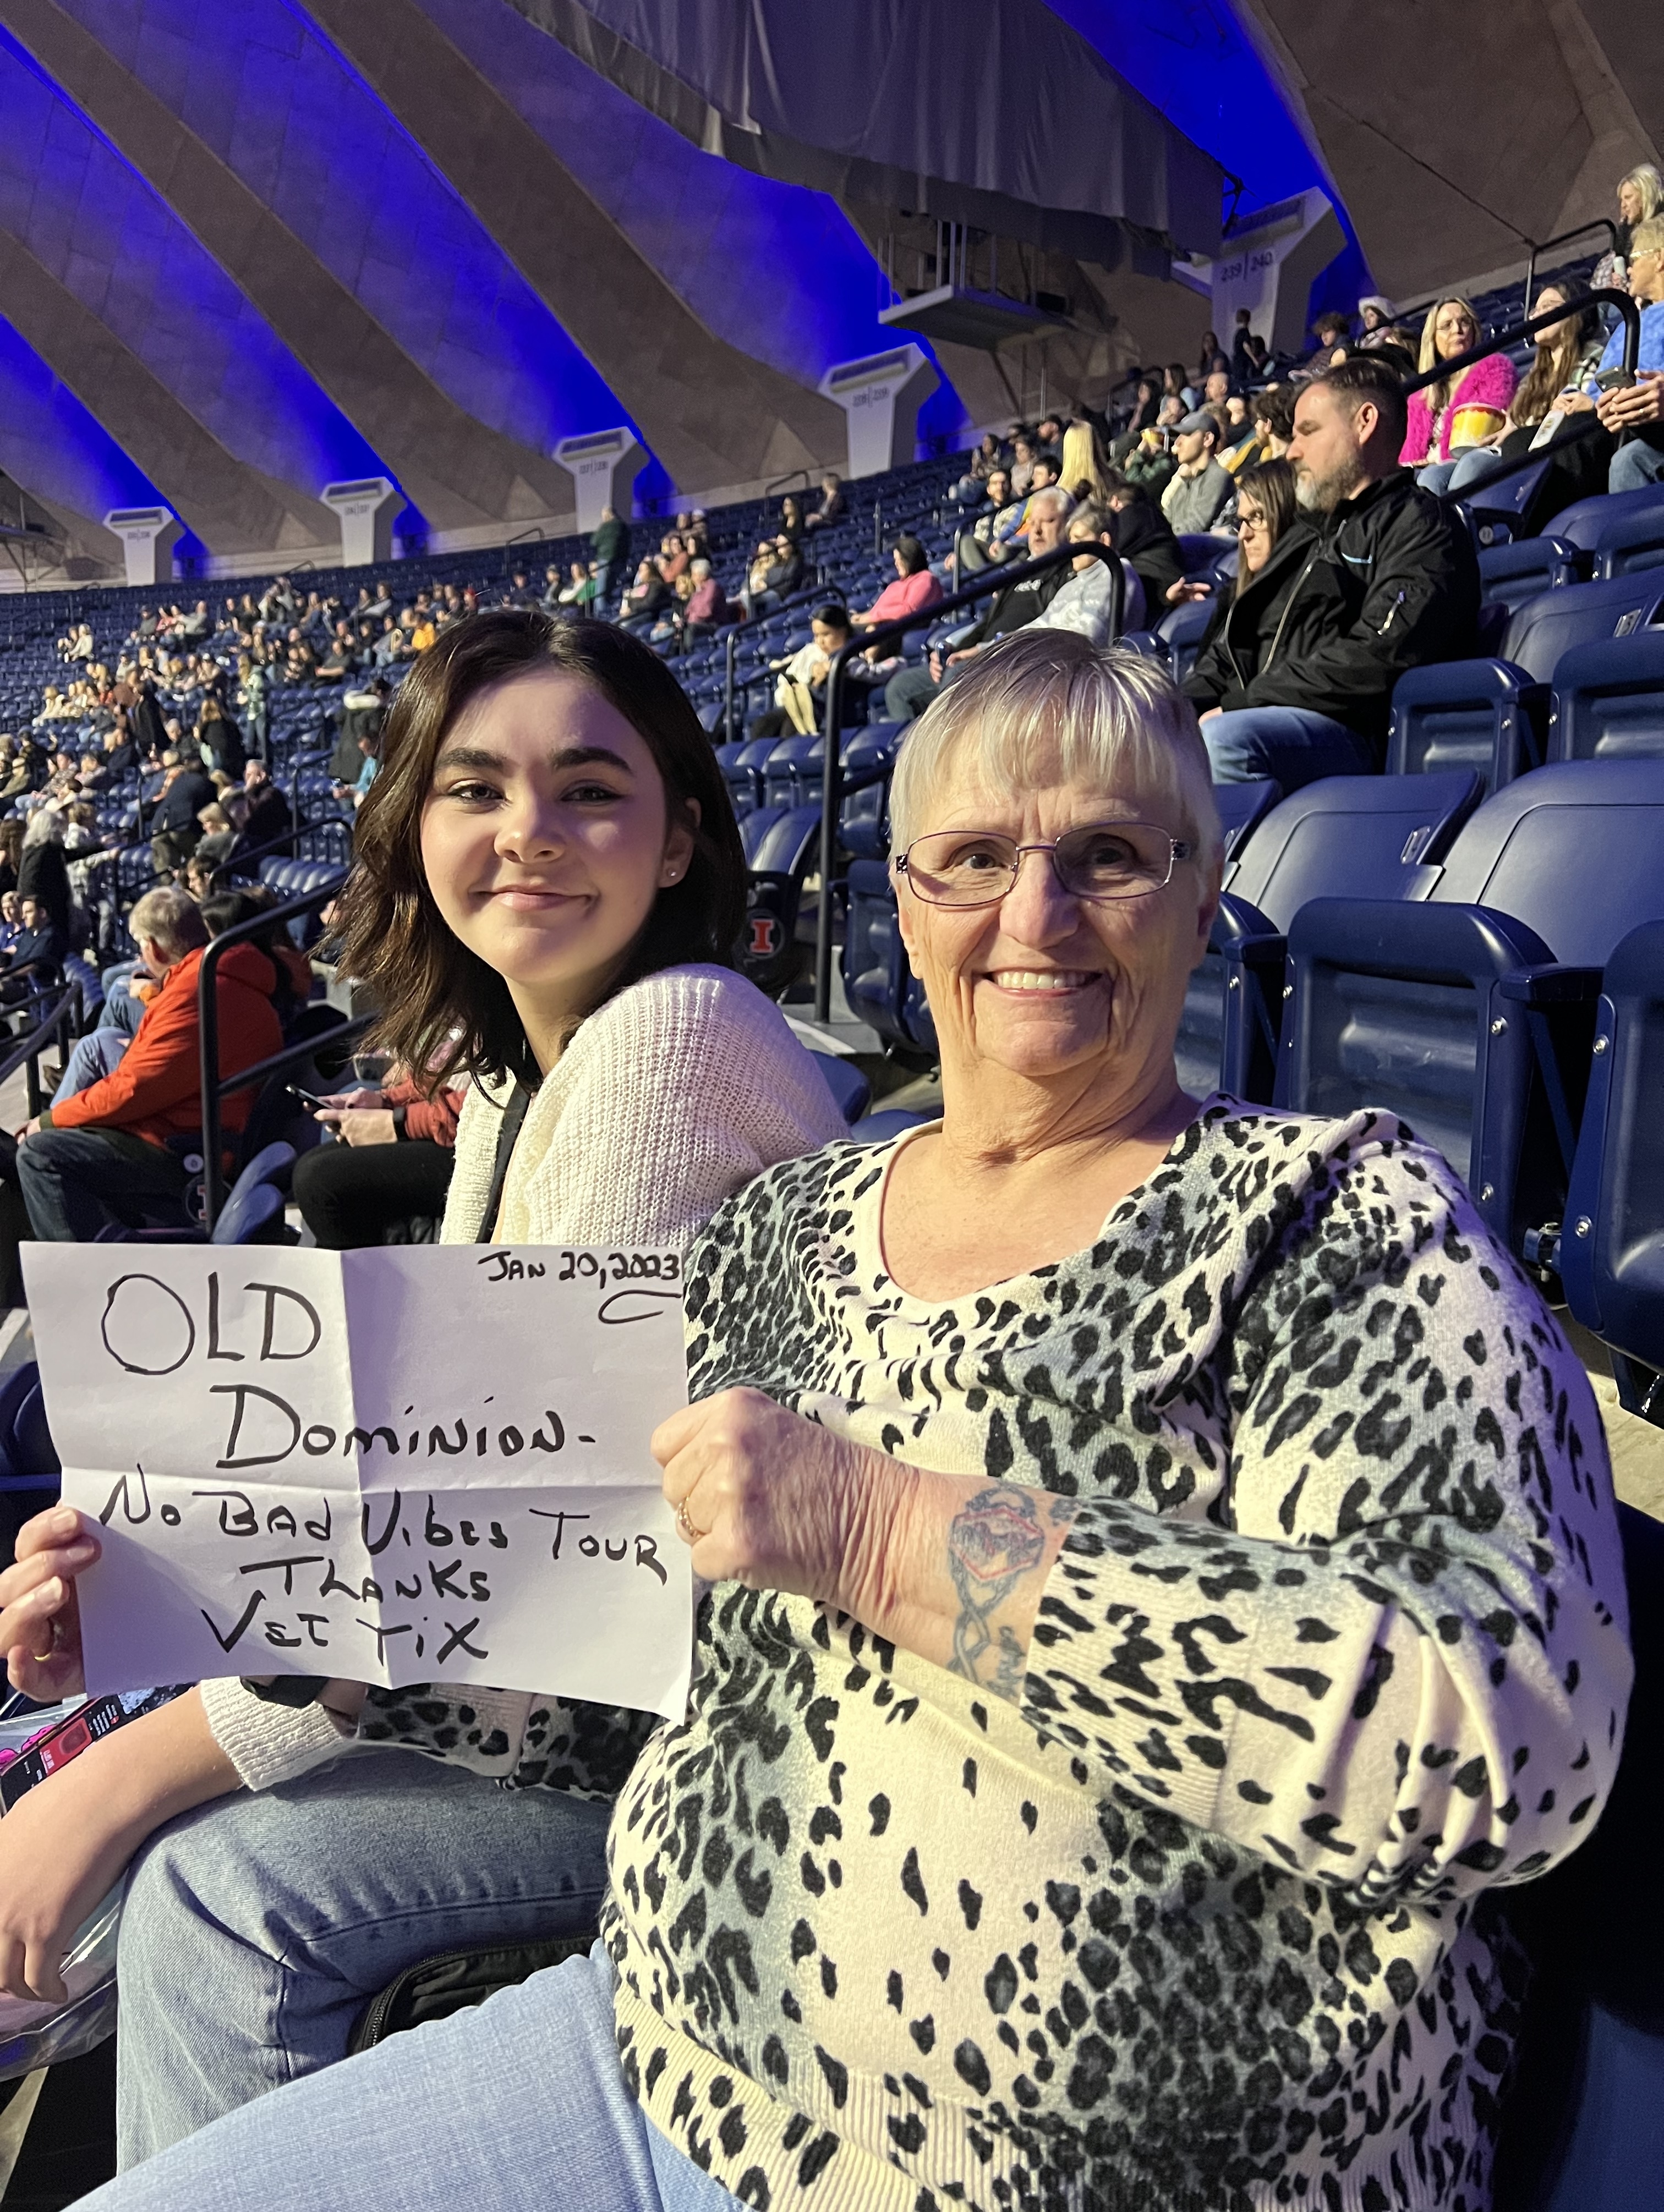 Old Dominion - No Bad Vibes Tour